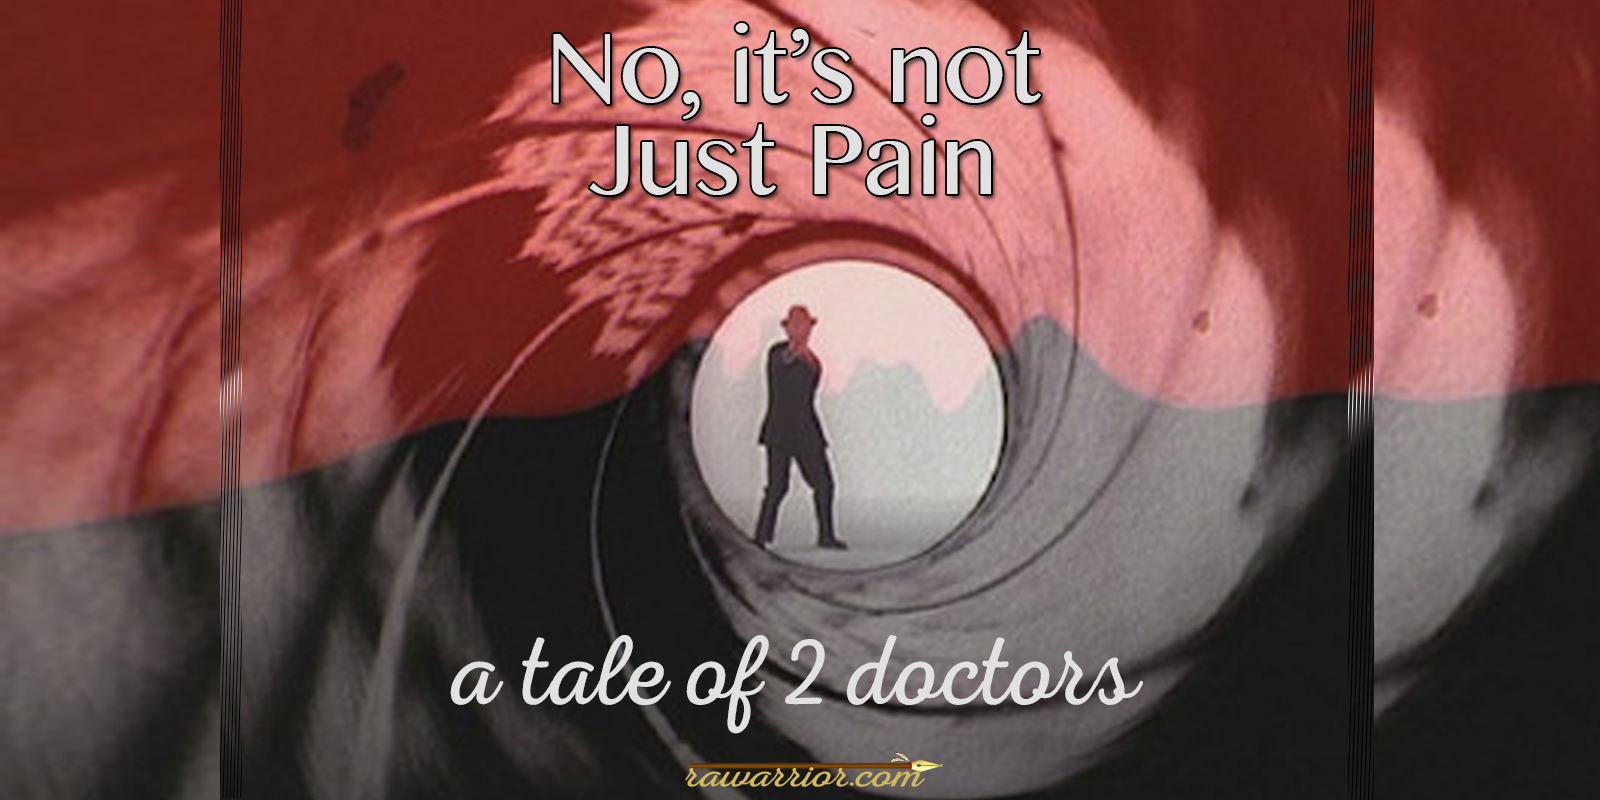 It's just pain, right?